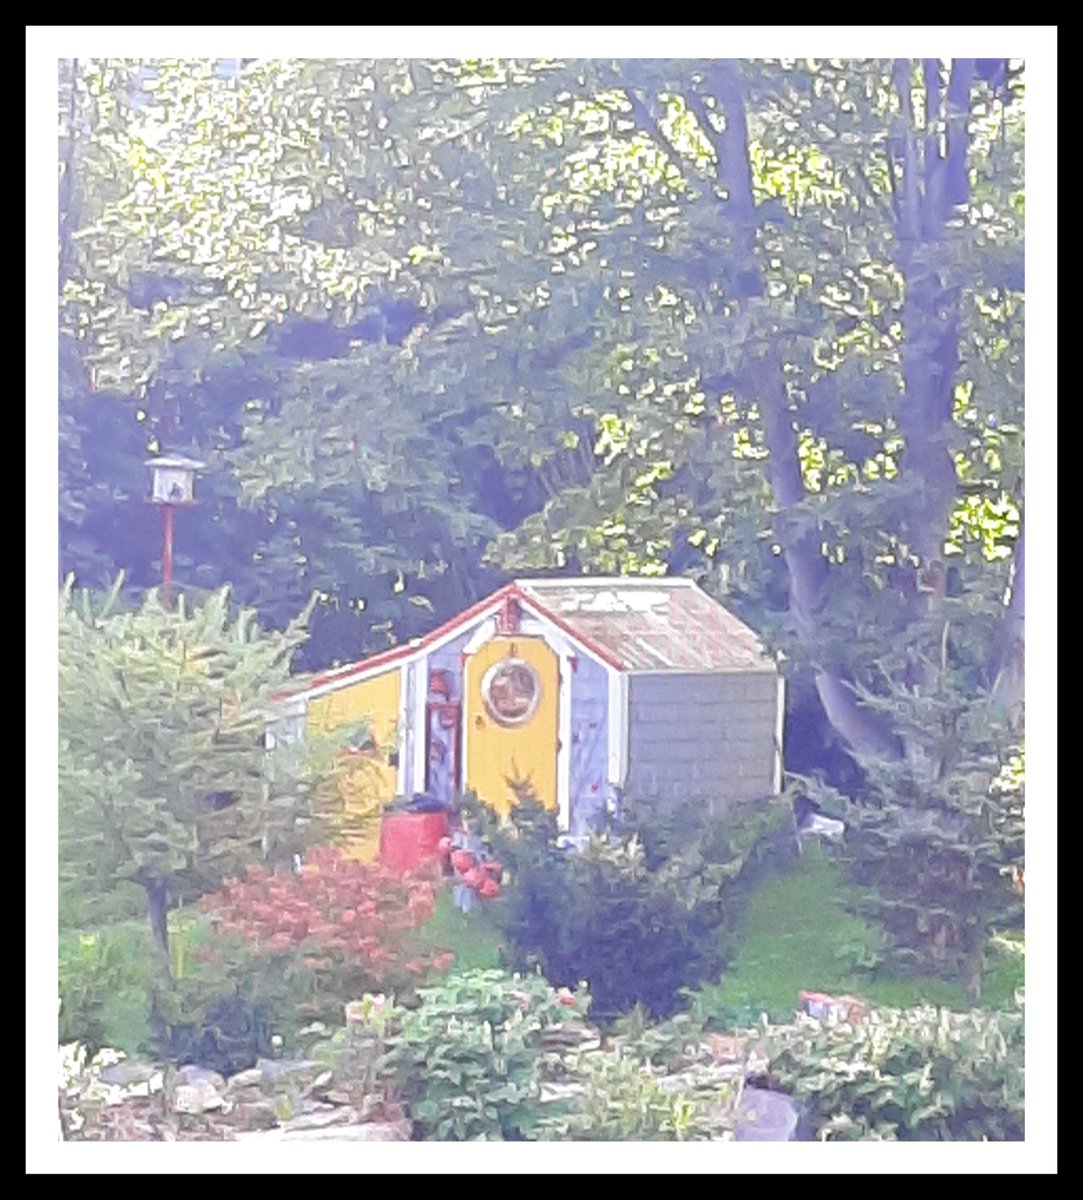 I loved the way the sunlight filtered through the leaves and lit up this little garden shed. #newfoundland #stjohns #quidividi